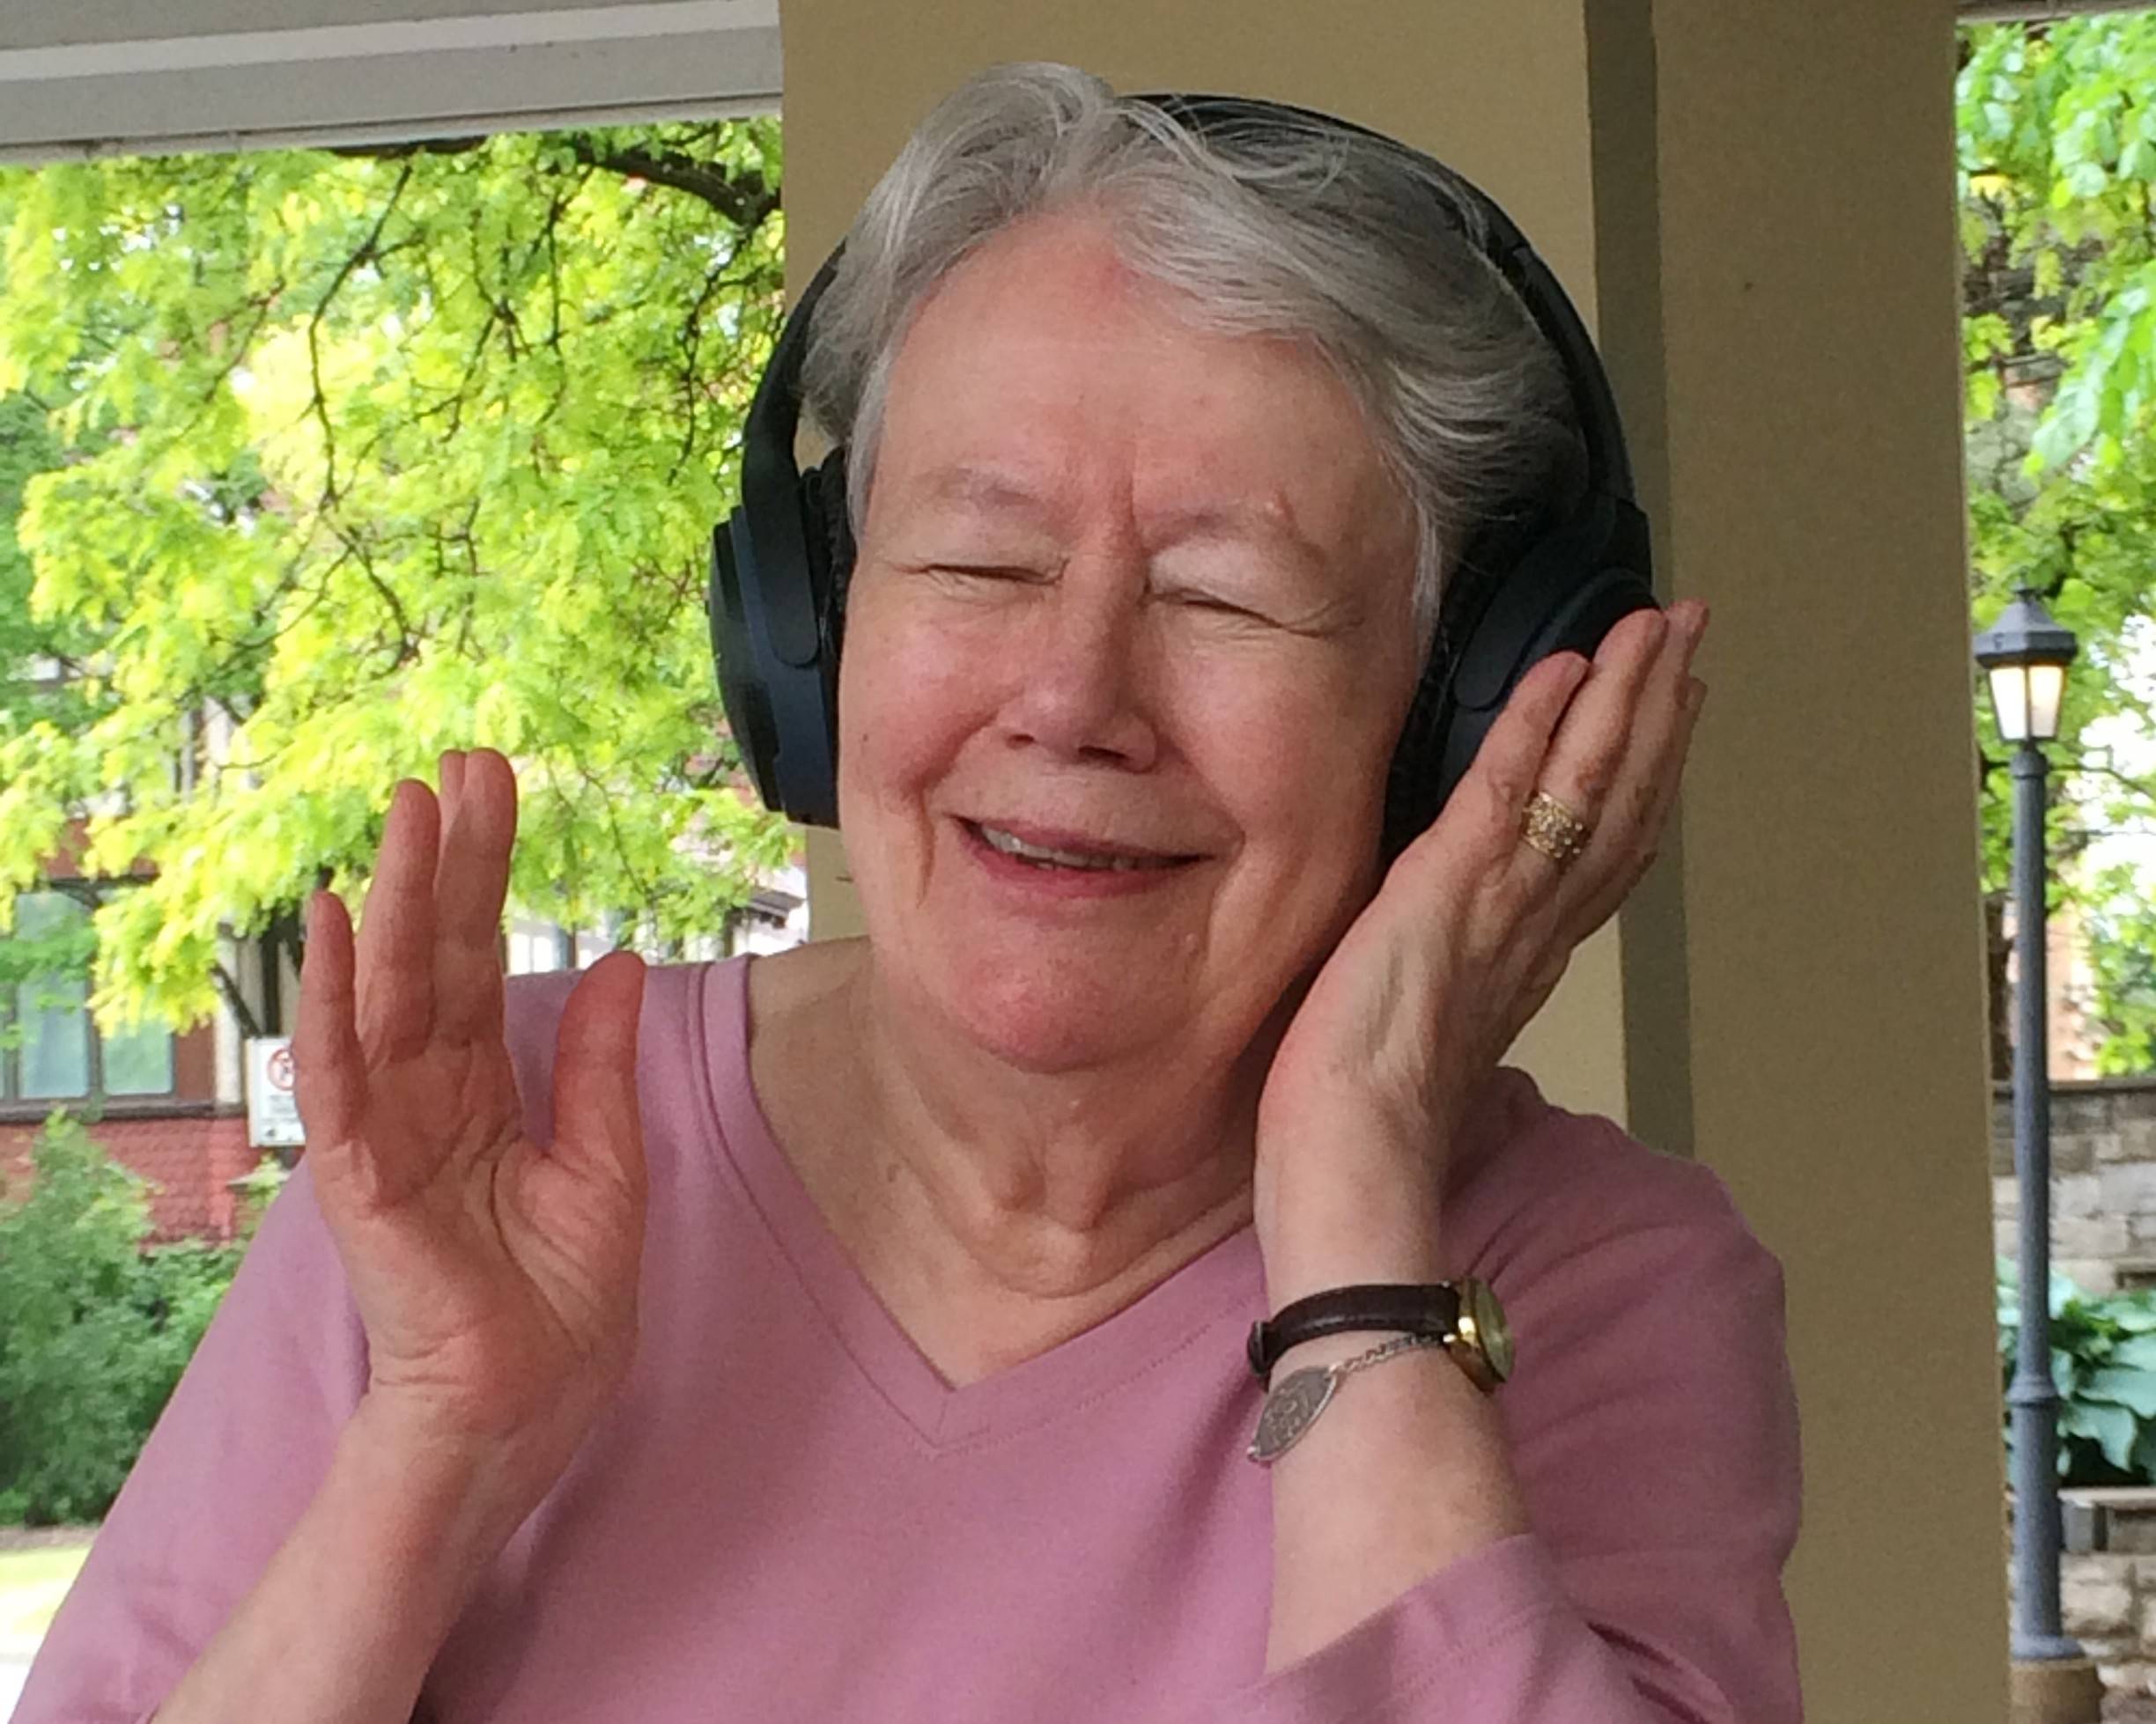 Lady smiling with headphones